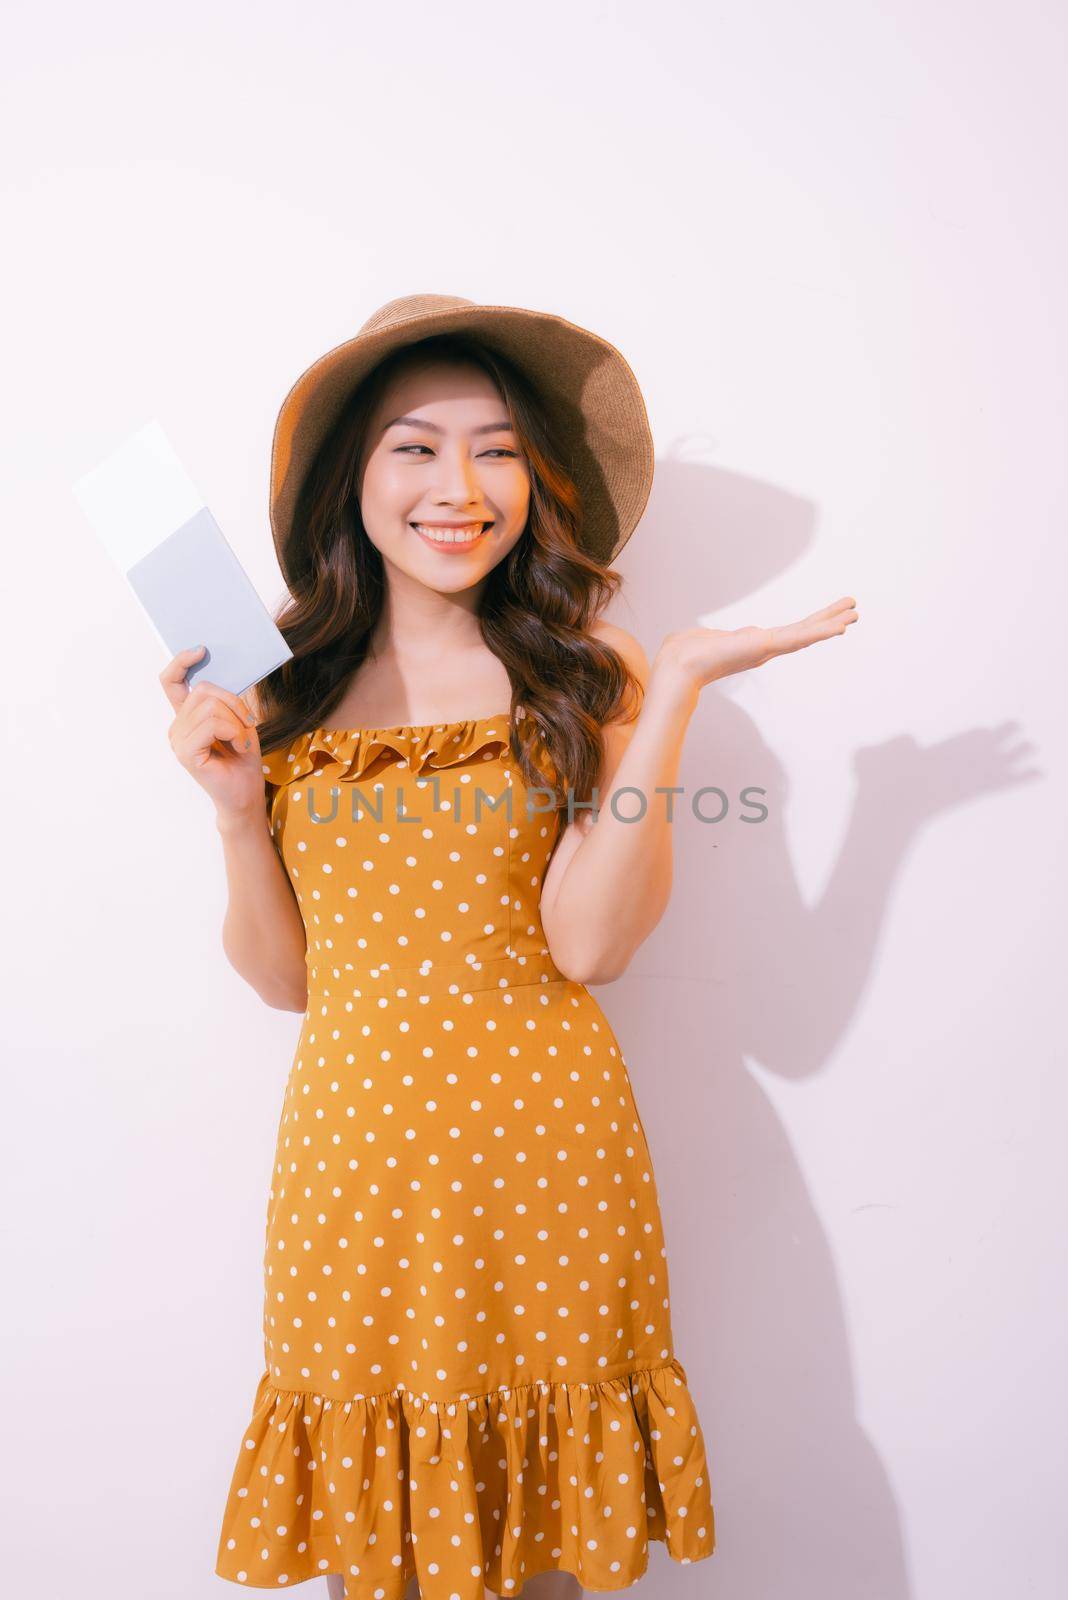 Travel concept portrait of smiling woman holding passport with ticket showing copy paste